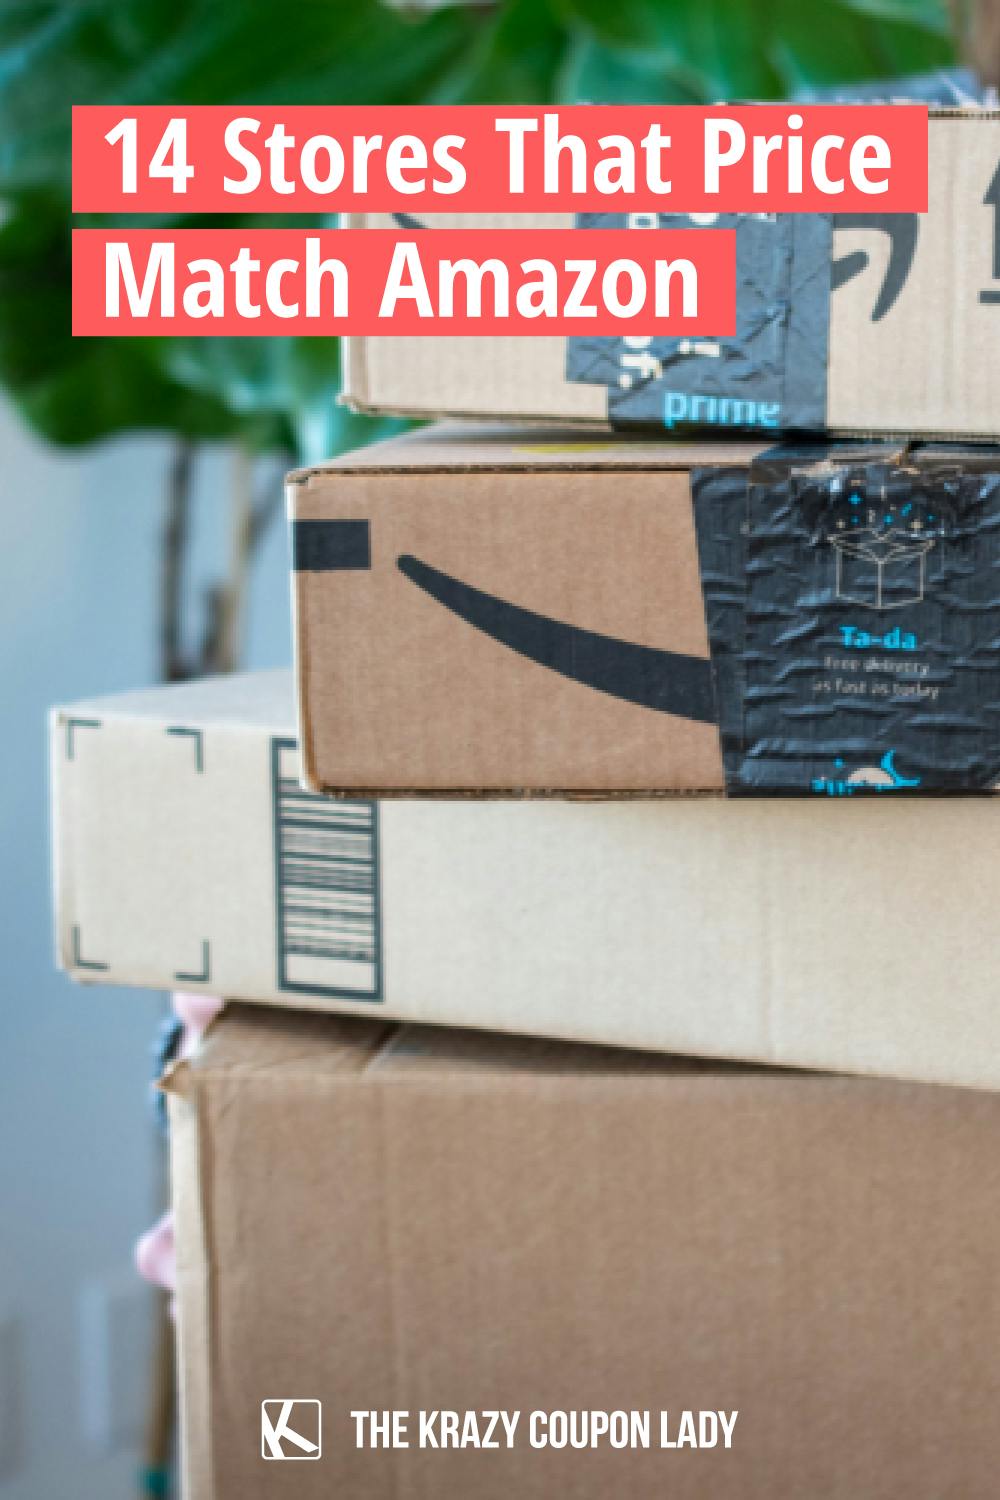 Does Best Buy Price Match Amazon? You Bet! Here Are 11 Retailers Who Will Too